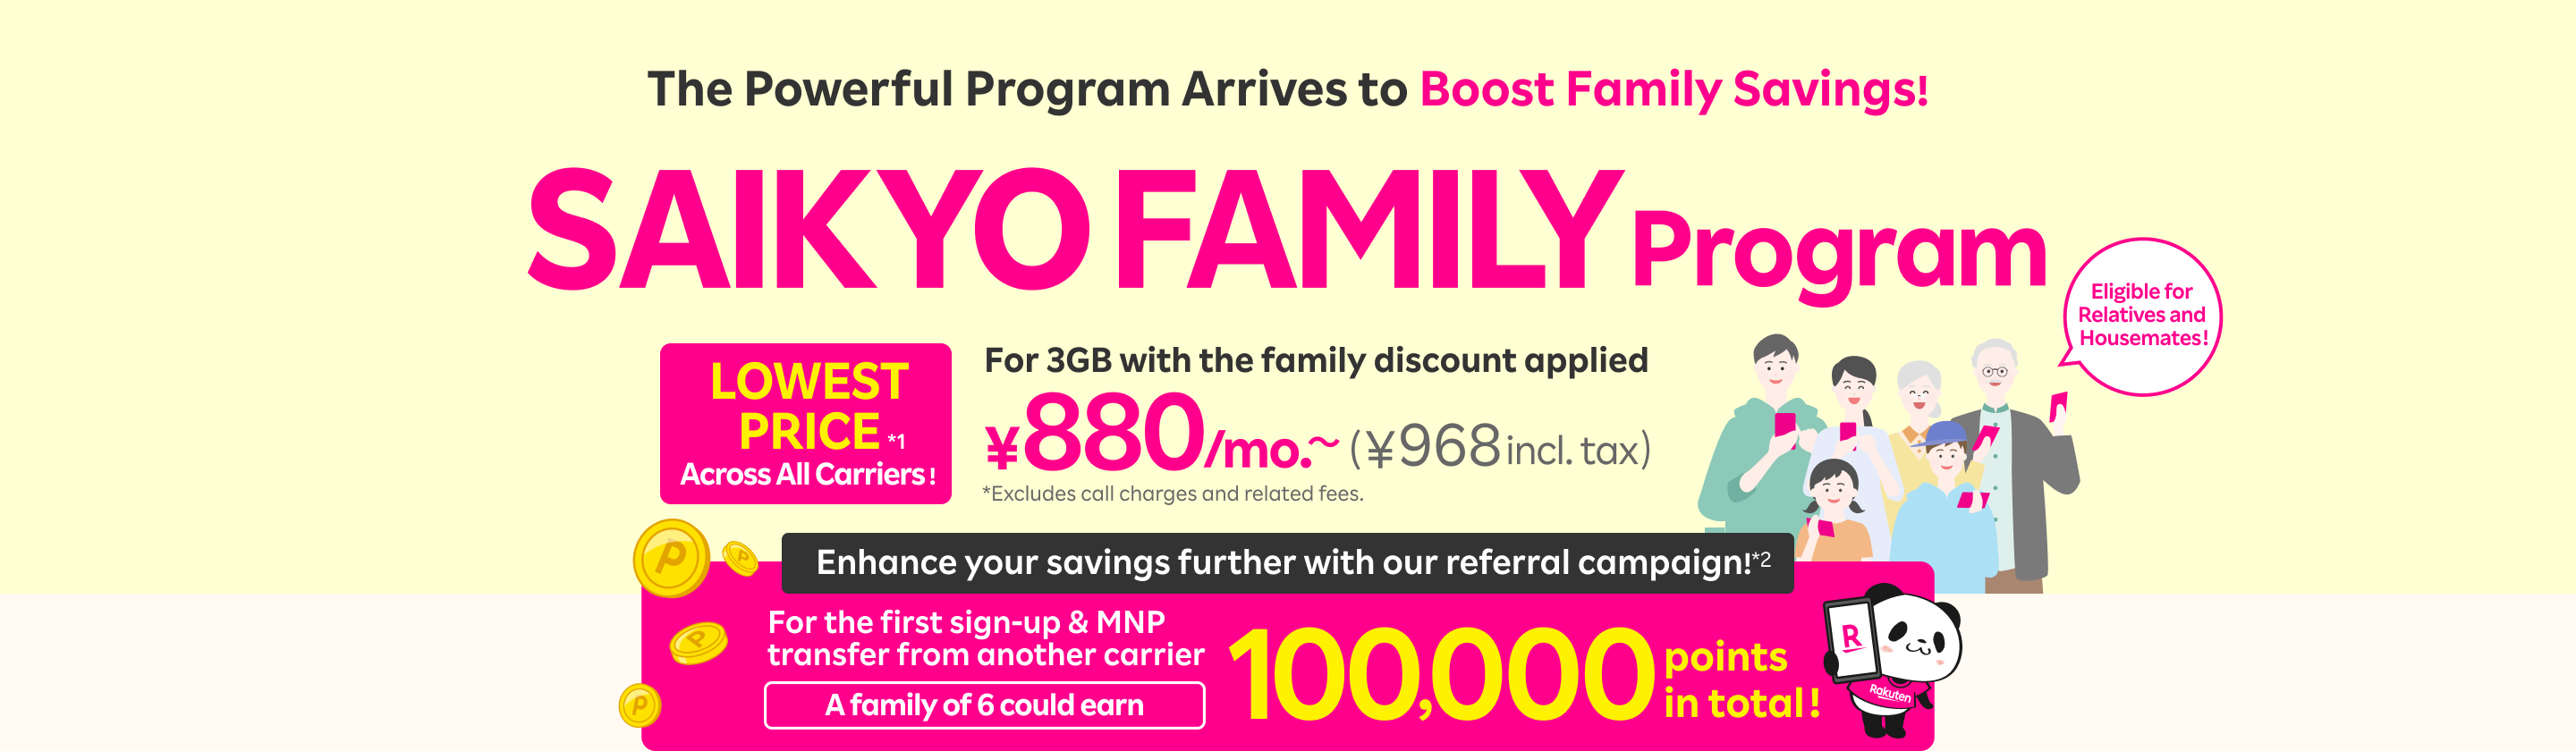 The powerful program arrives to boost family savings! Best rates for 3GB or unlimited data with our family discount - LOWEST PRICE across all carriers. Enjoy up to 3GB for just 880 yen/mo. (968 yen incl. tax) or unlimited high-speed data for 2,880 yen/mo. (3,168 yen incl. tax).